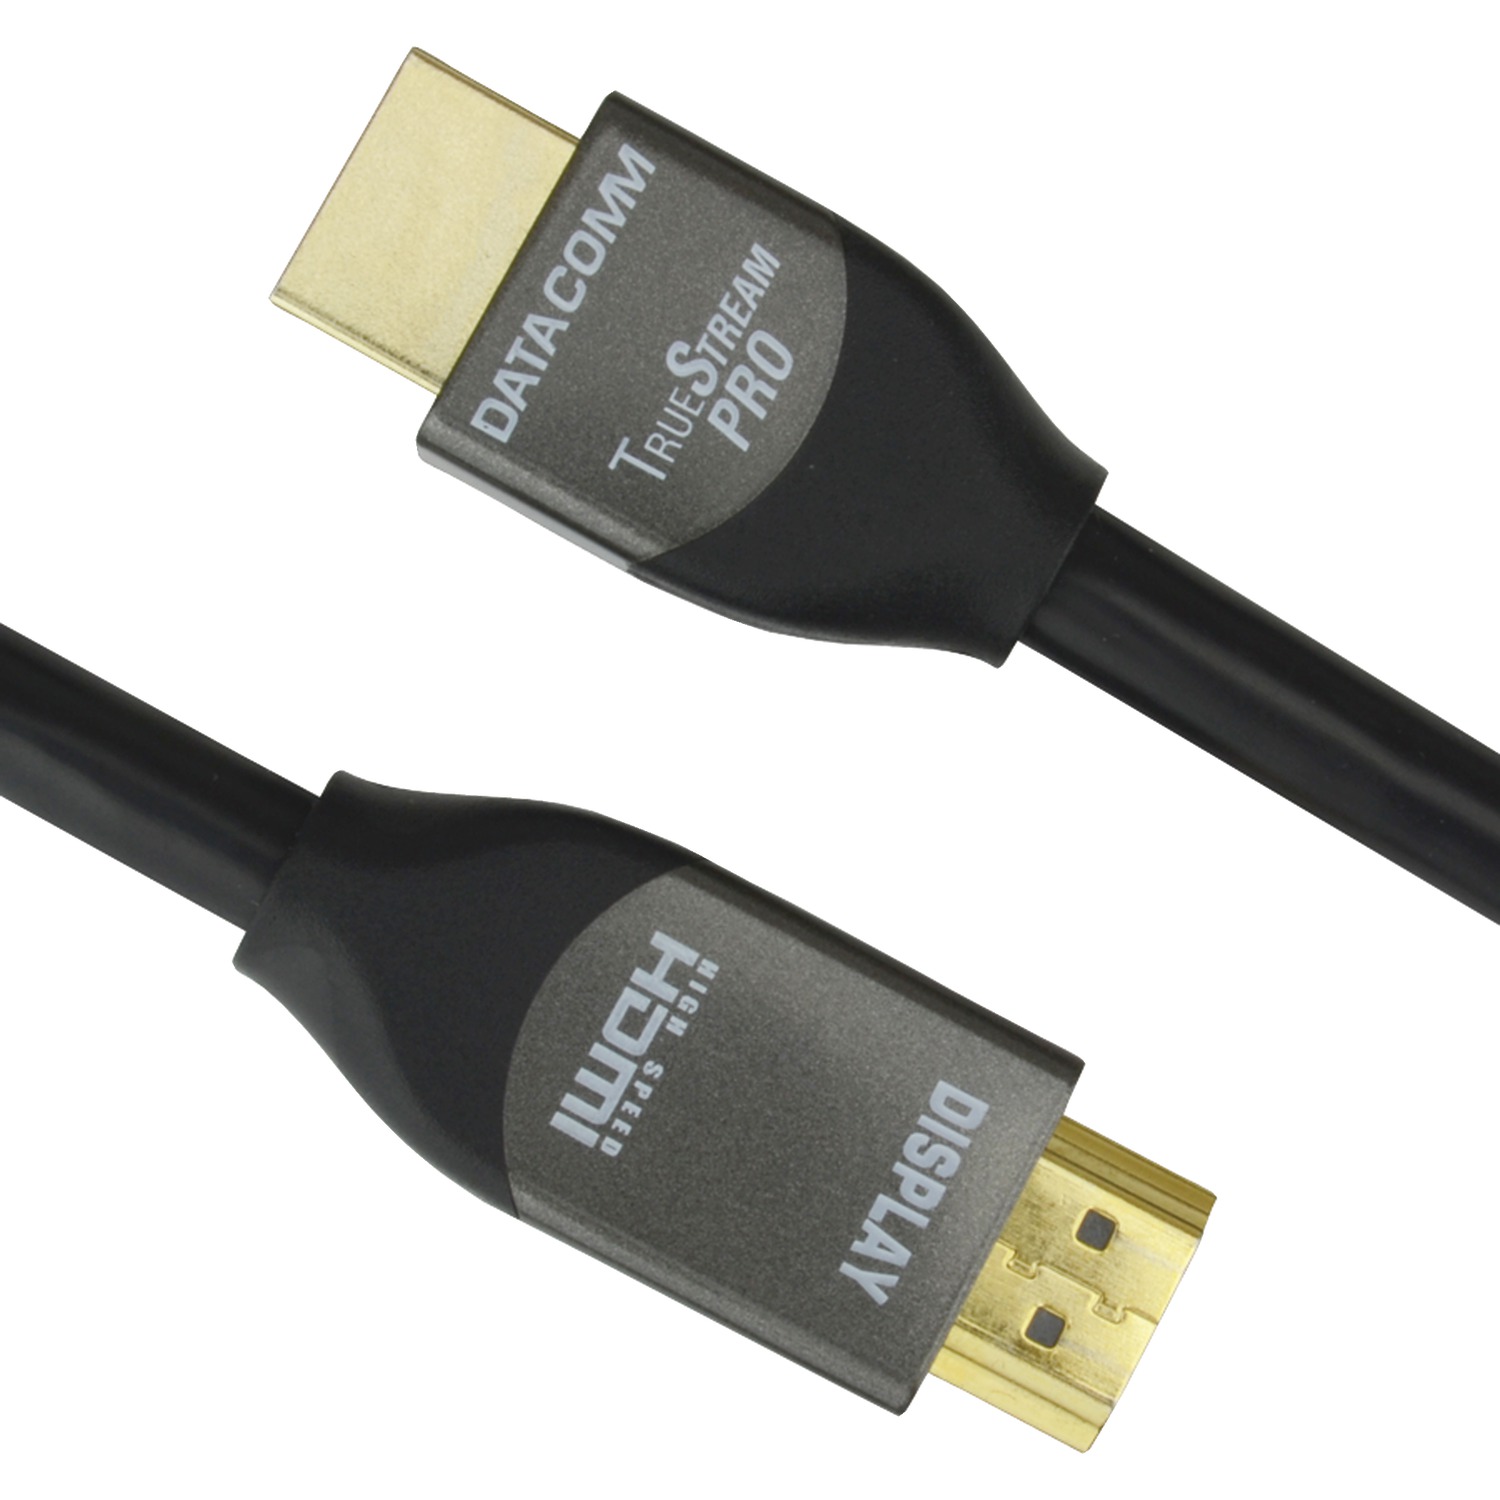 DataComm ELECTRONICS TrueStream Pro 18 Gbps HDMI Cable with Ethernet (15 Feet)